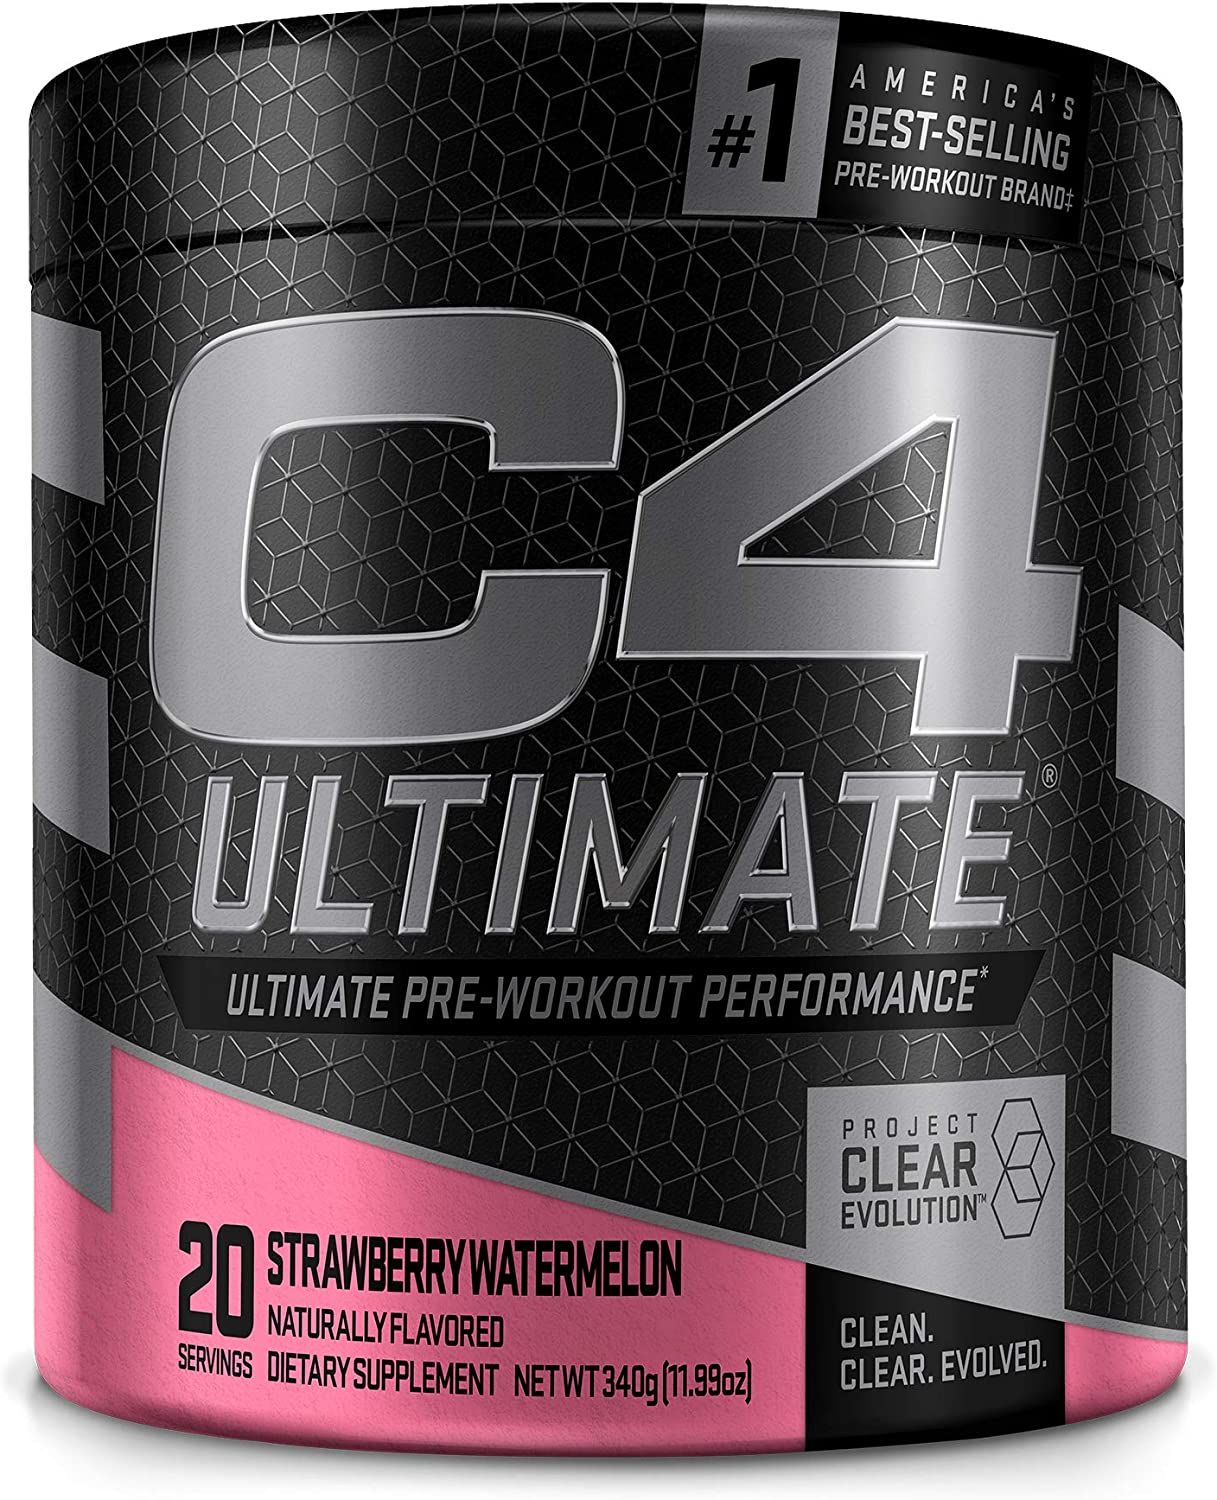 C4 Ultimate Workout Performance Strawberry Watermelon, 20 Servings